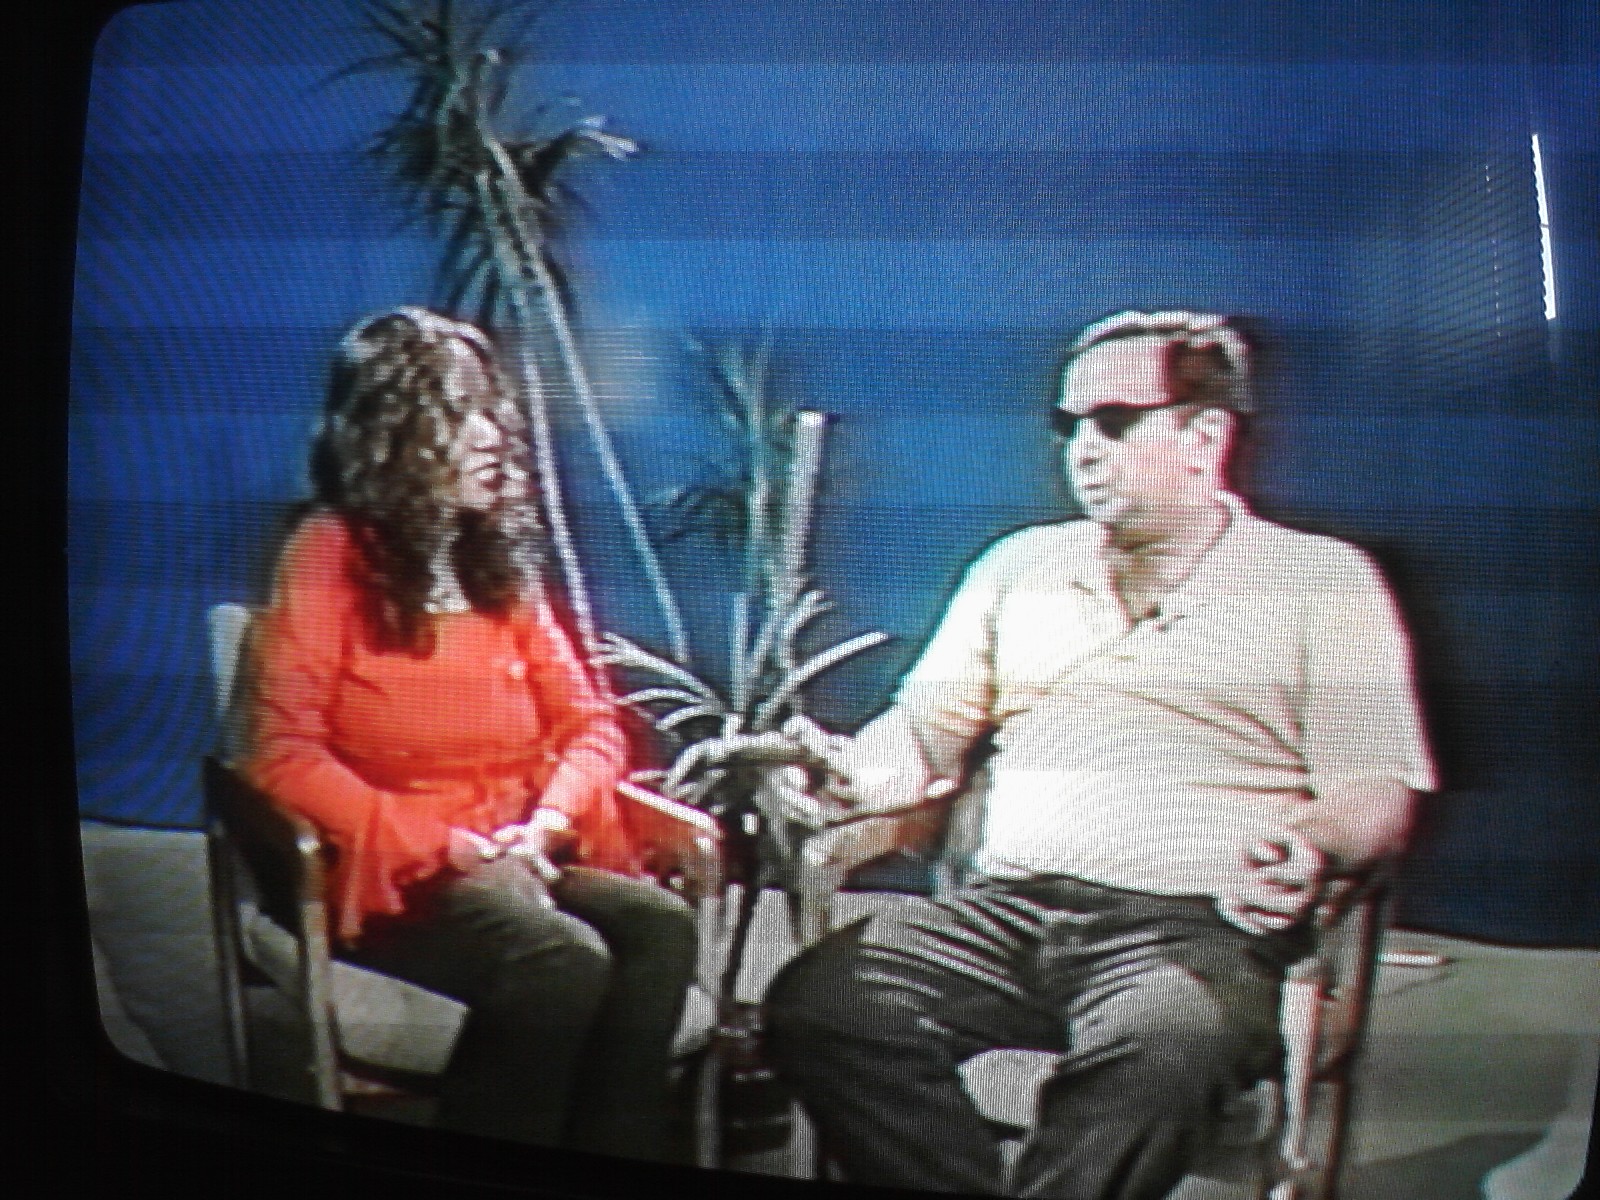 Maria Frisby and Dave Sweeney on the set of Time Warner Cable's The Dave Gold Show in New York, N.Y.